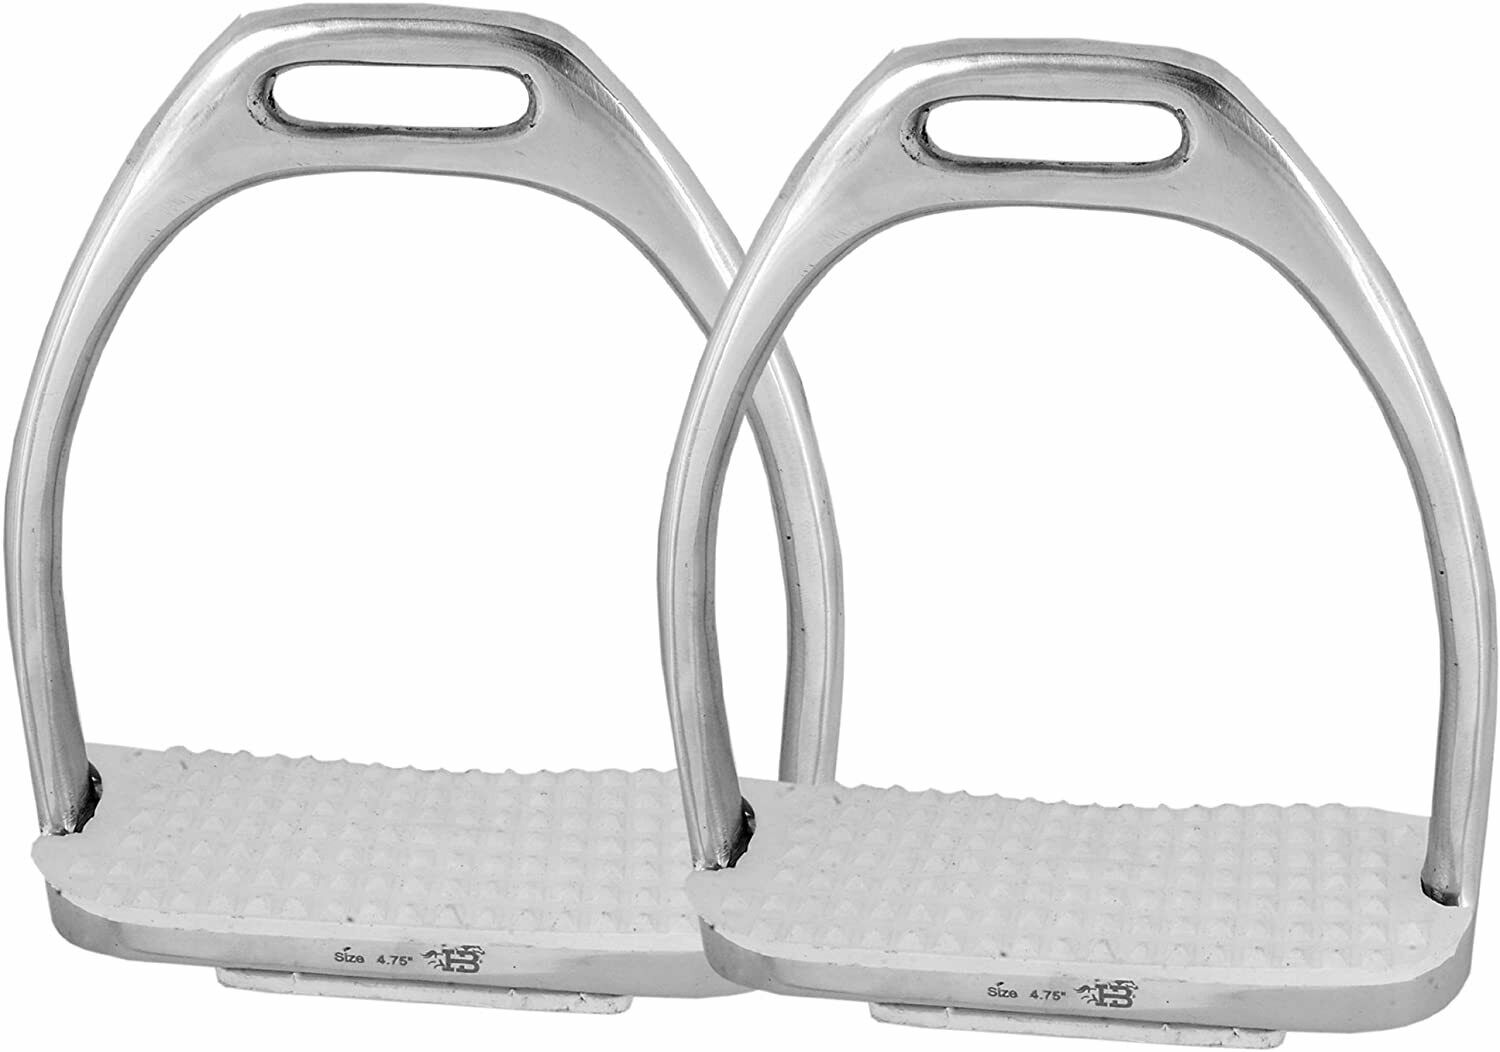 Huxlay Bros Hb Pro Stainless Steel Stirrup And Tread - 1102